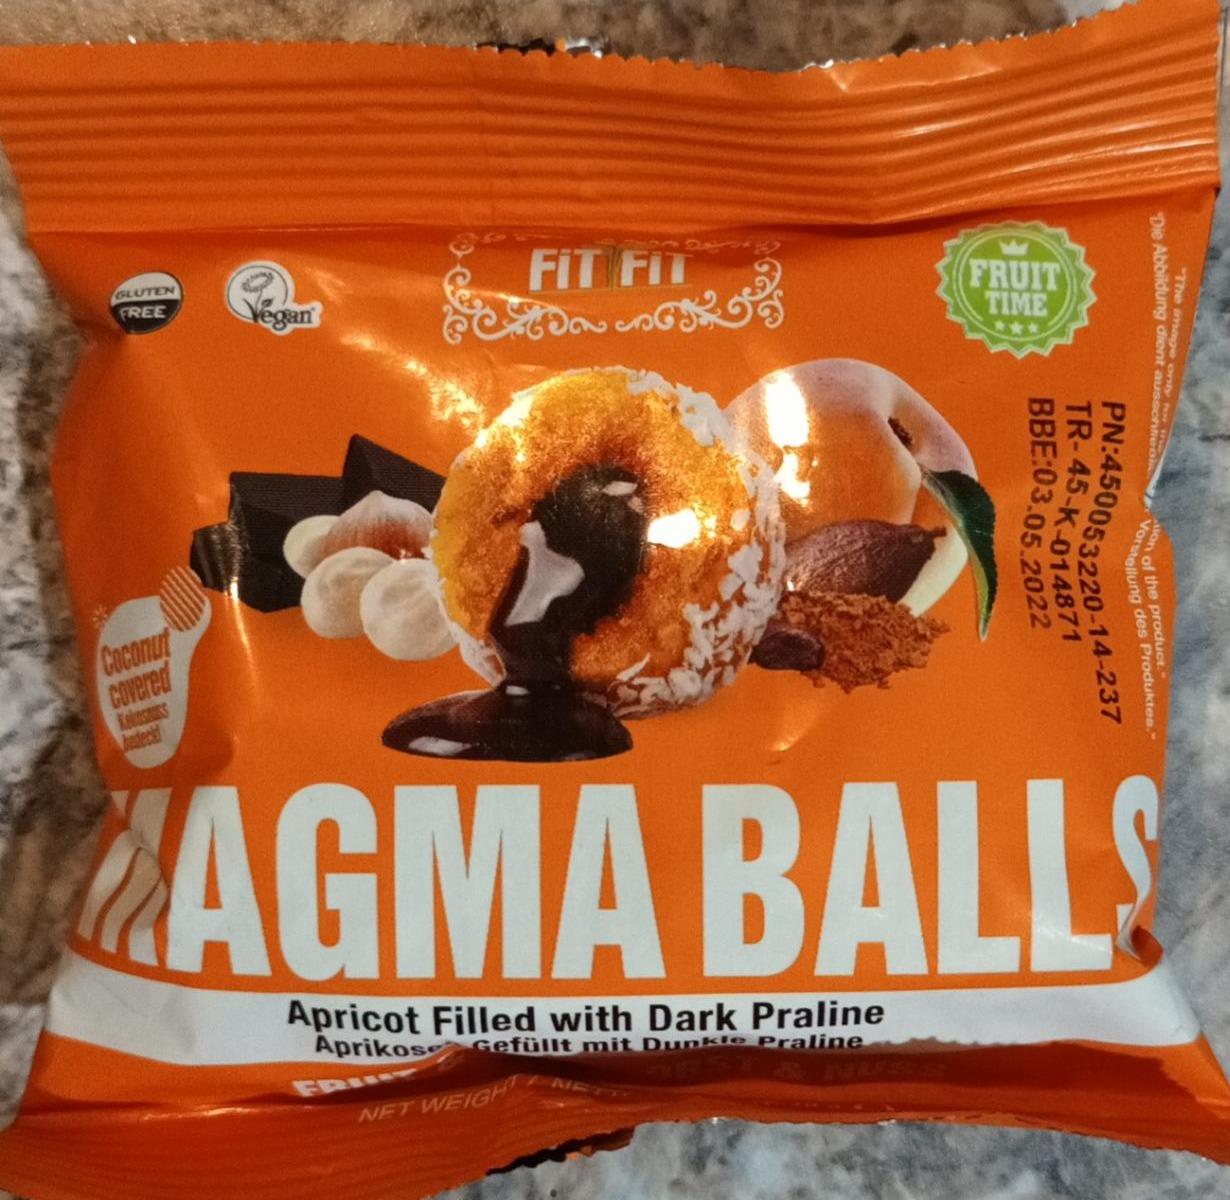 Fotografie - Magma Balls Apricot Filled With Dark Praline Fit Fit